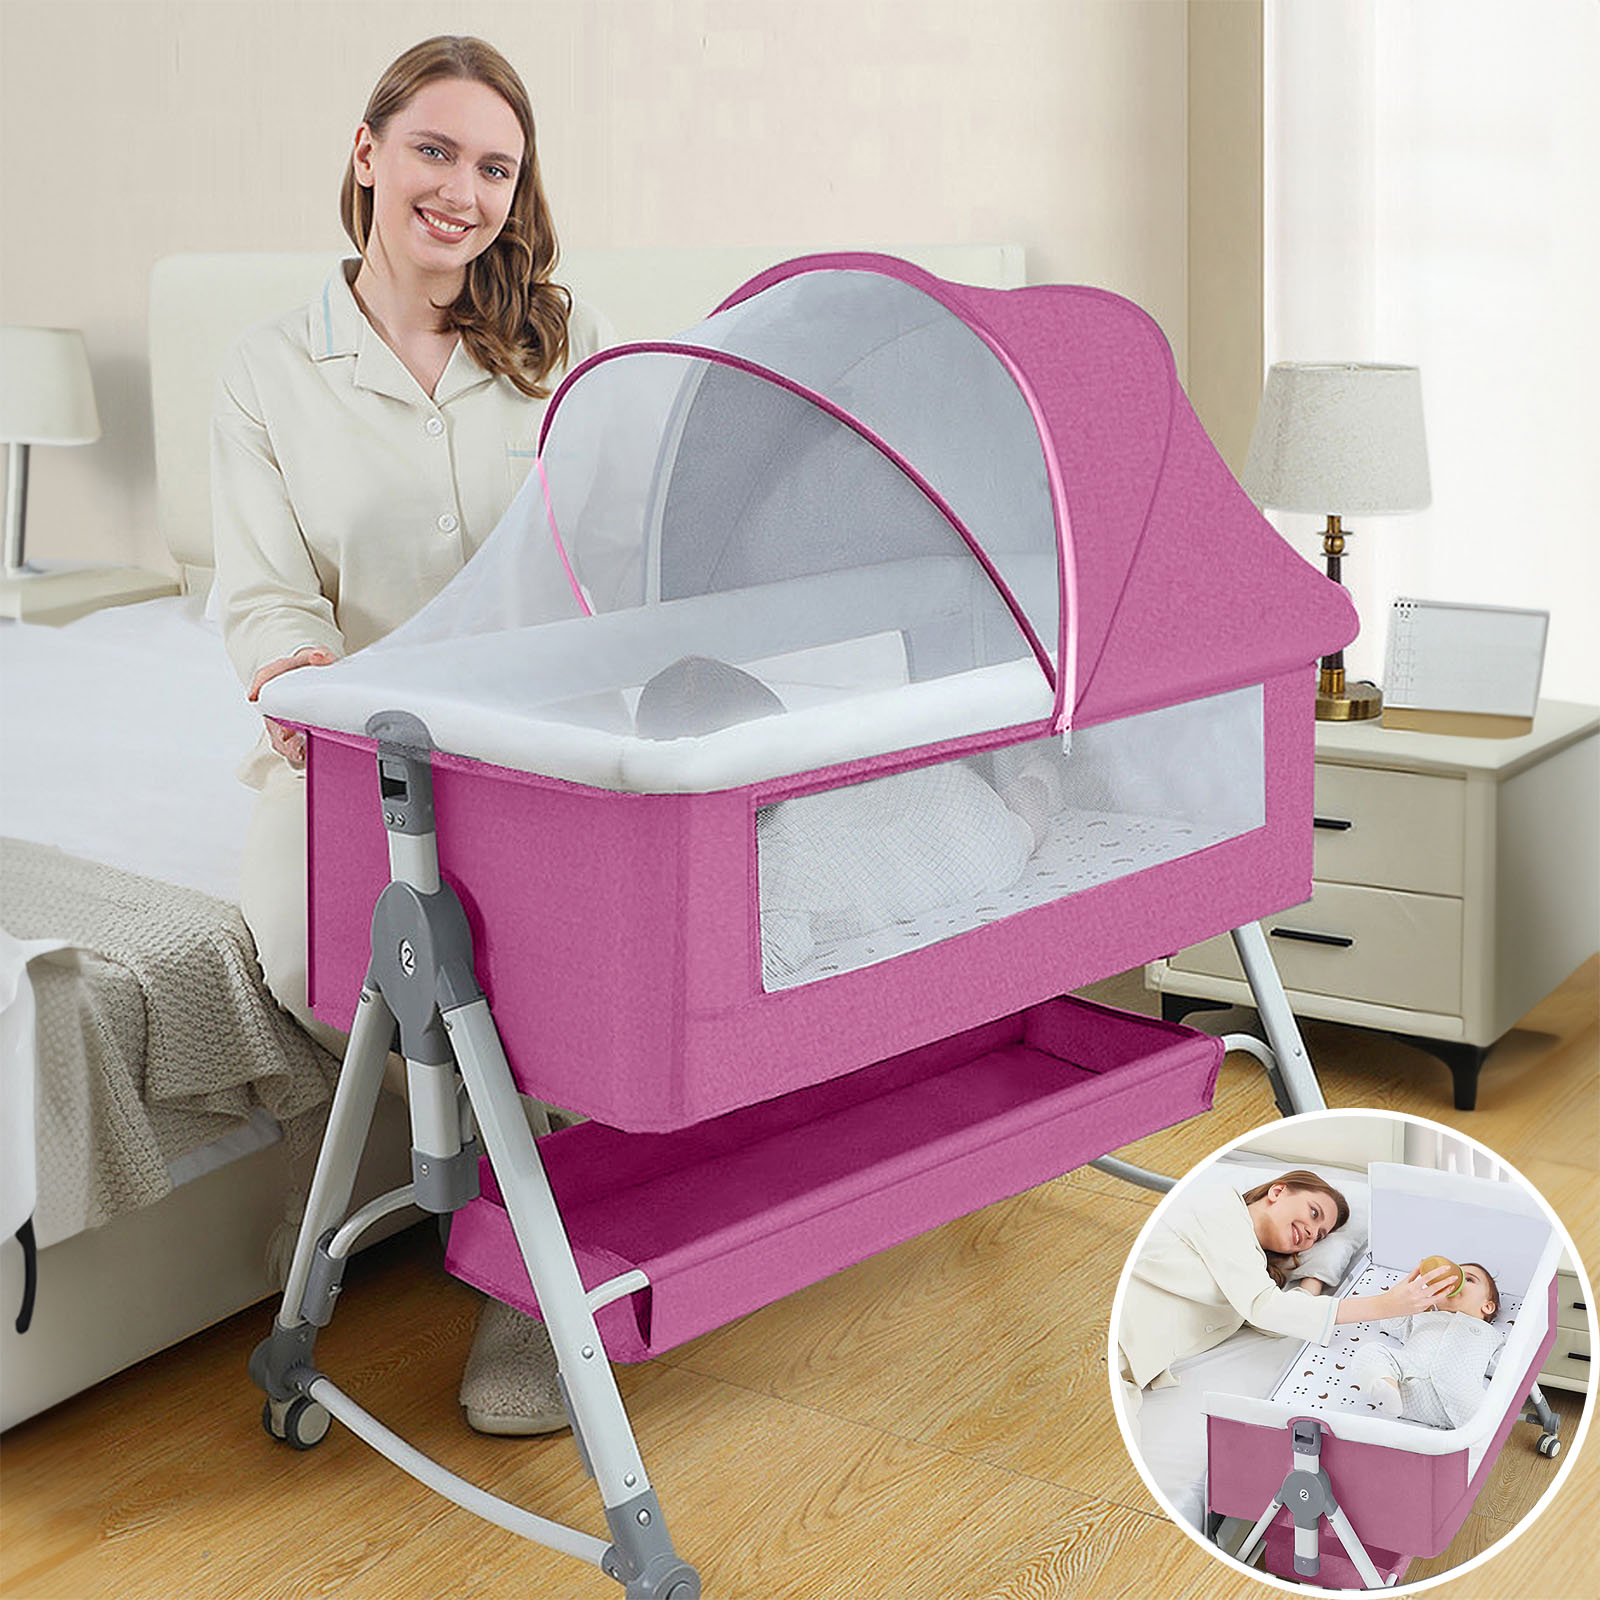 EONROACOO Foldable Baby Bassinet with Changing Table, Adjustable Bedside Crib for Infant, Pink - image 1 of 10